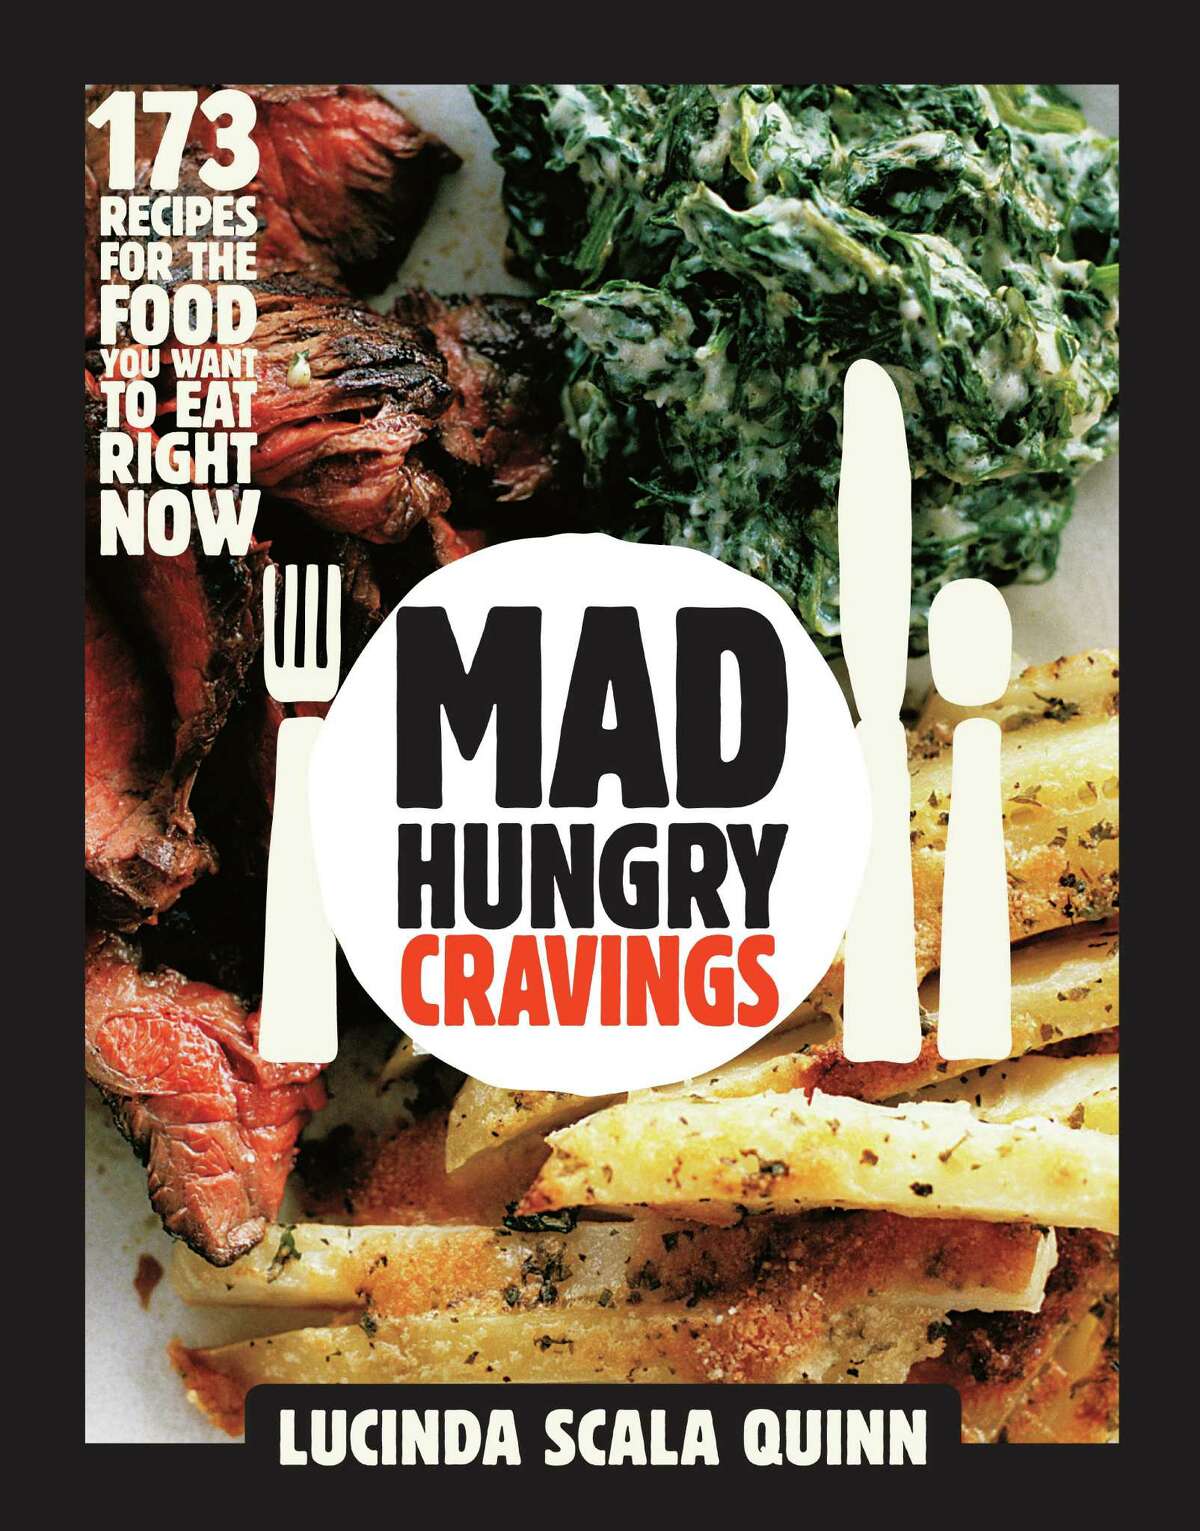 Cover "Mad hungry Cravings" by Lucinda Scala Quinn (Artisan Books).